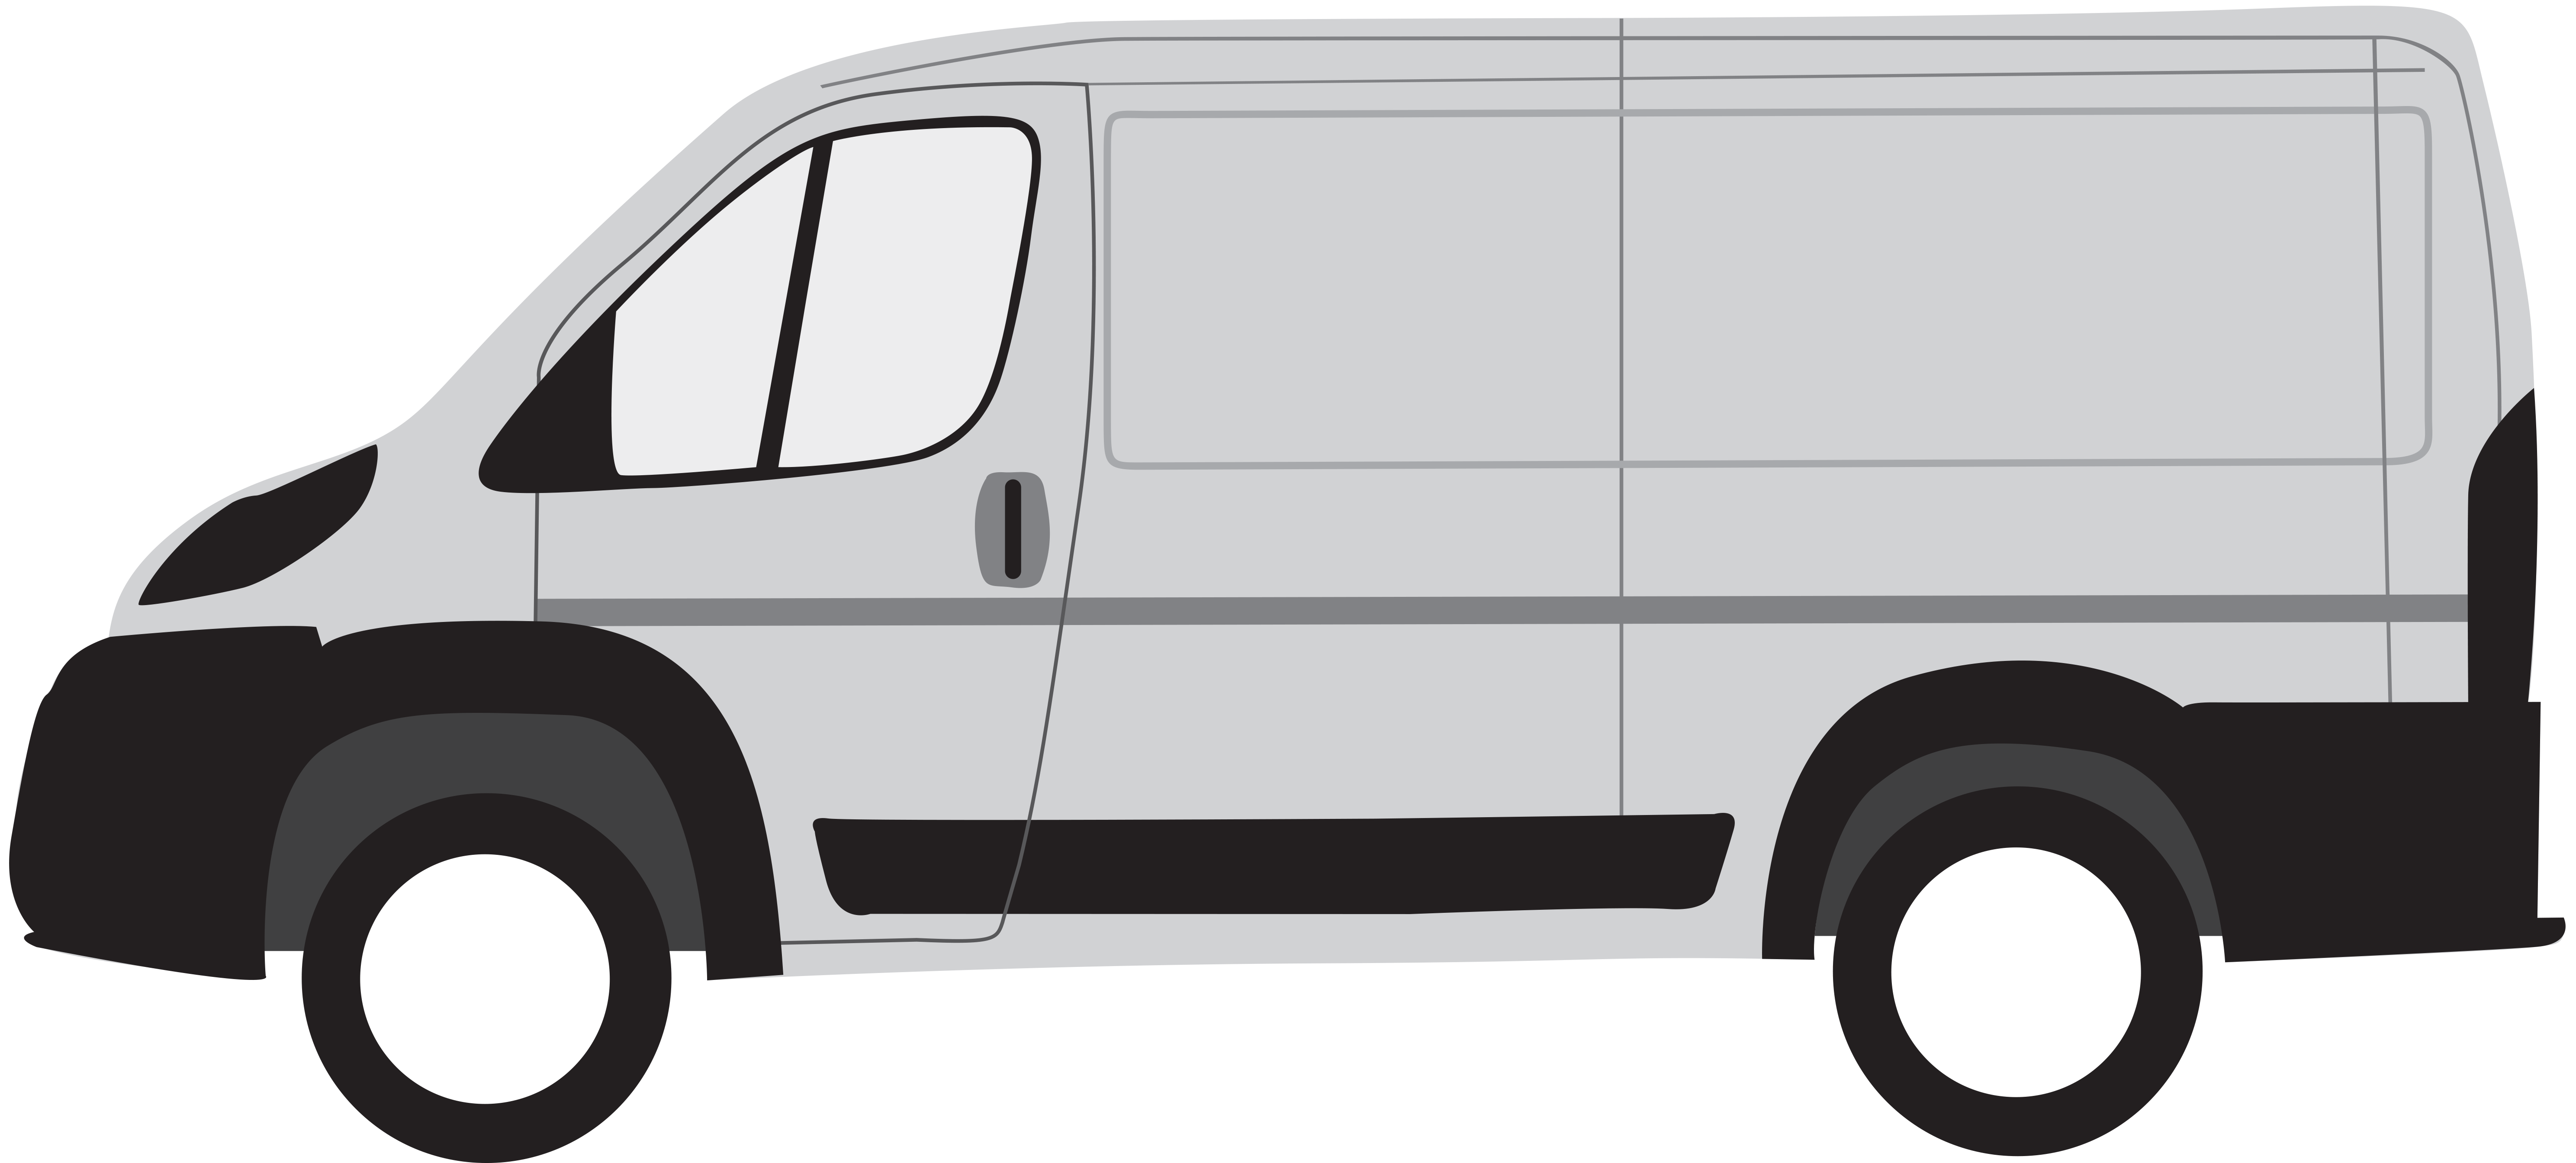 Promaster COMMERCIAL VAN EQUIPMENT SOLUTIONS FOR RAM PROMASTER